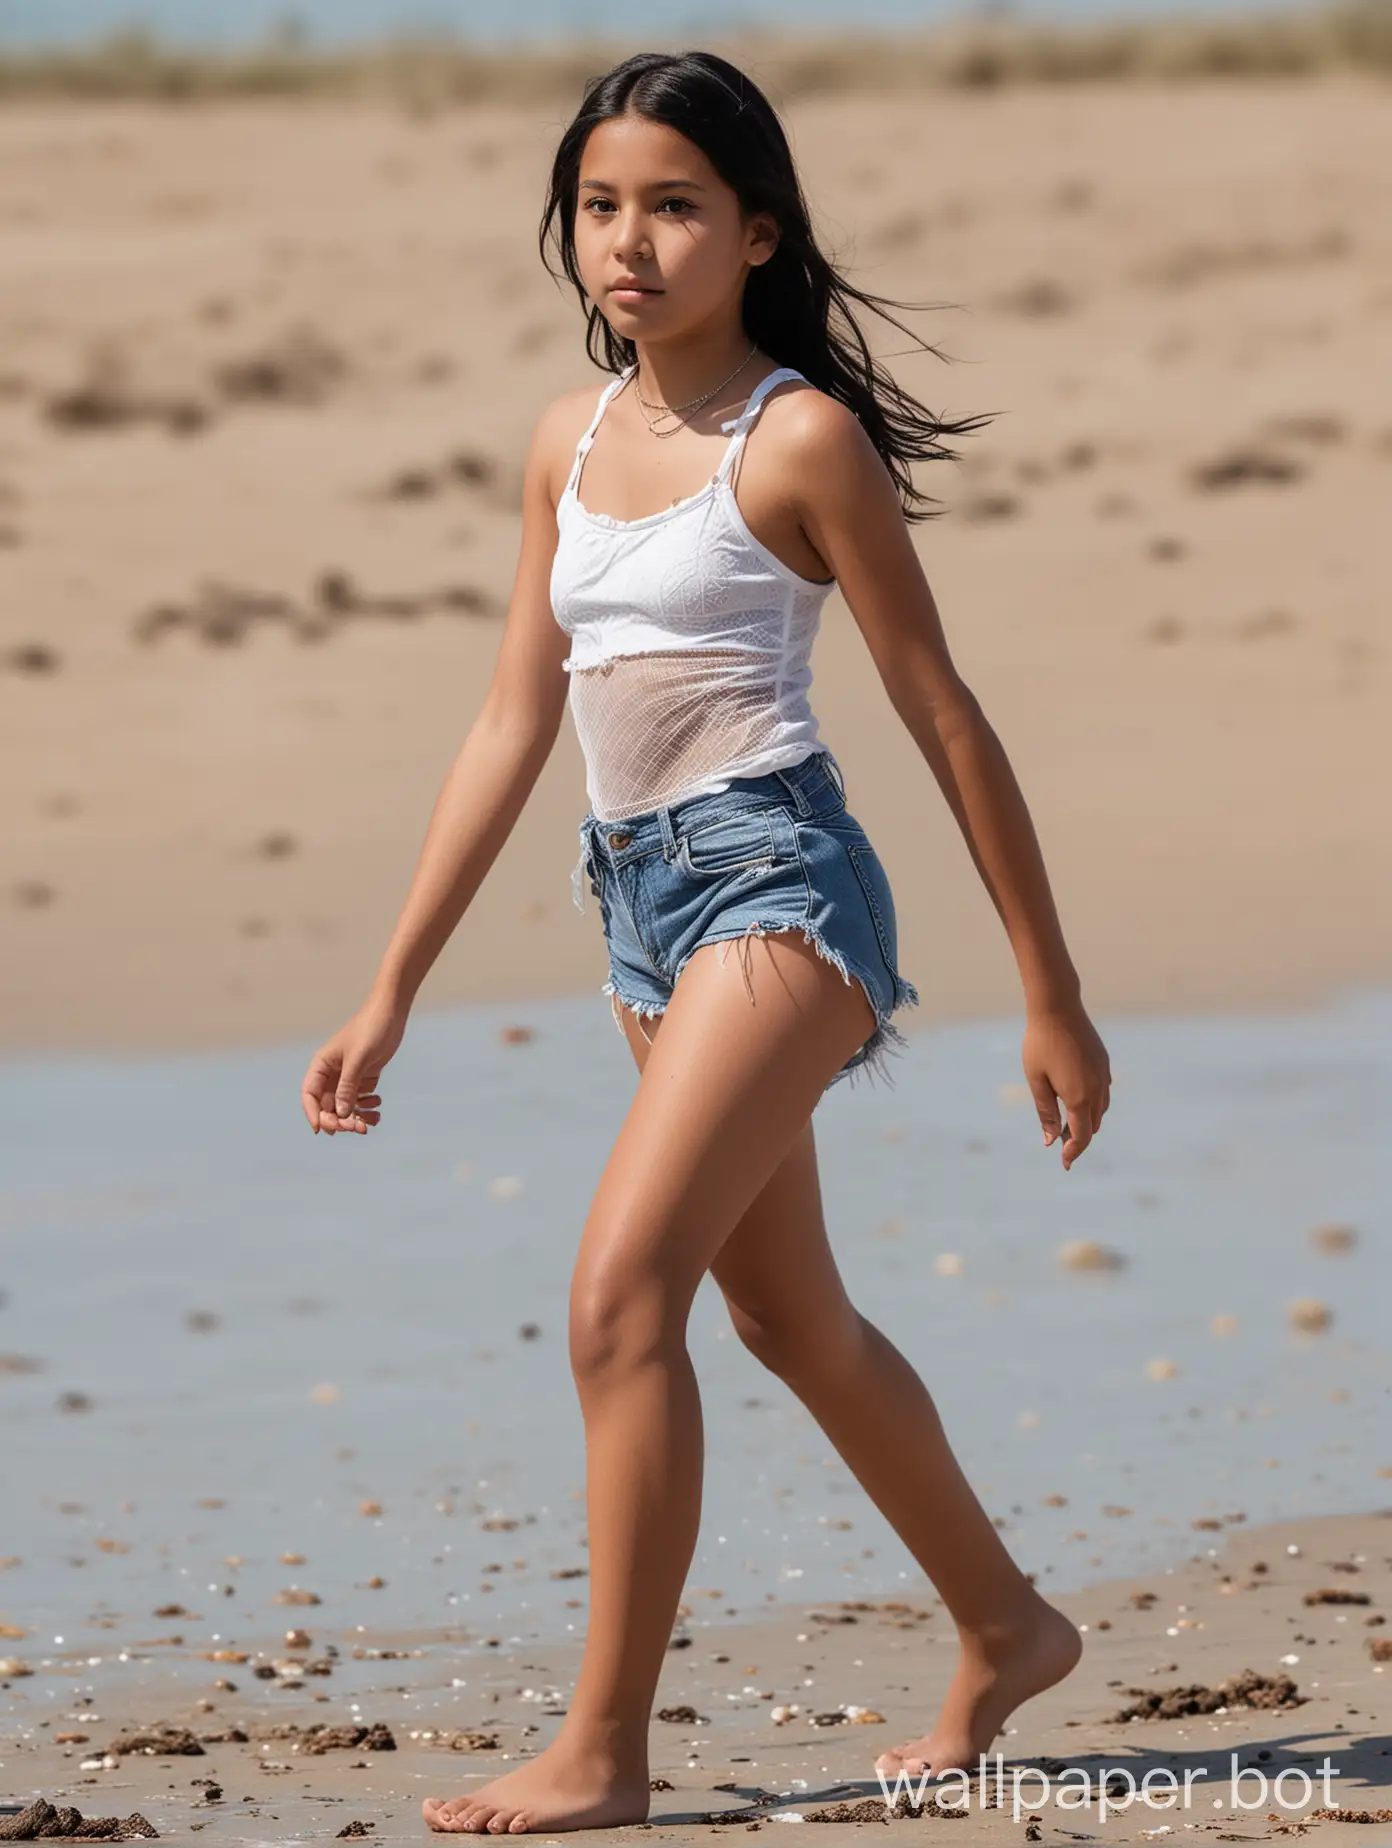 14 year old native American girl black hair black eyes with small breasts wearing denium shorts and white fishnet tank top walking on a beach 